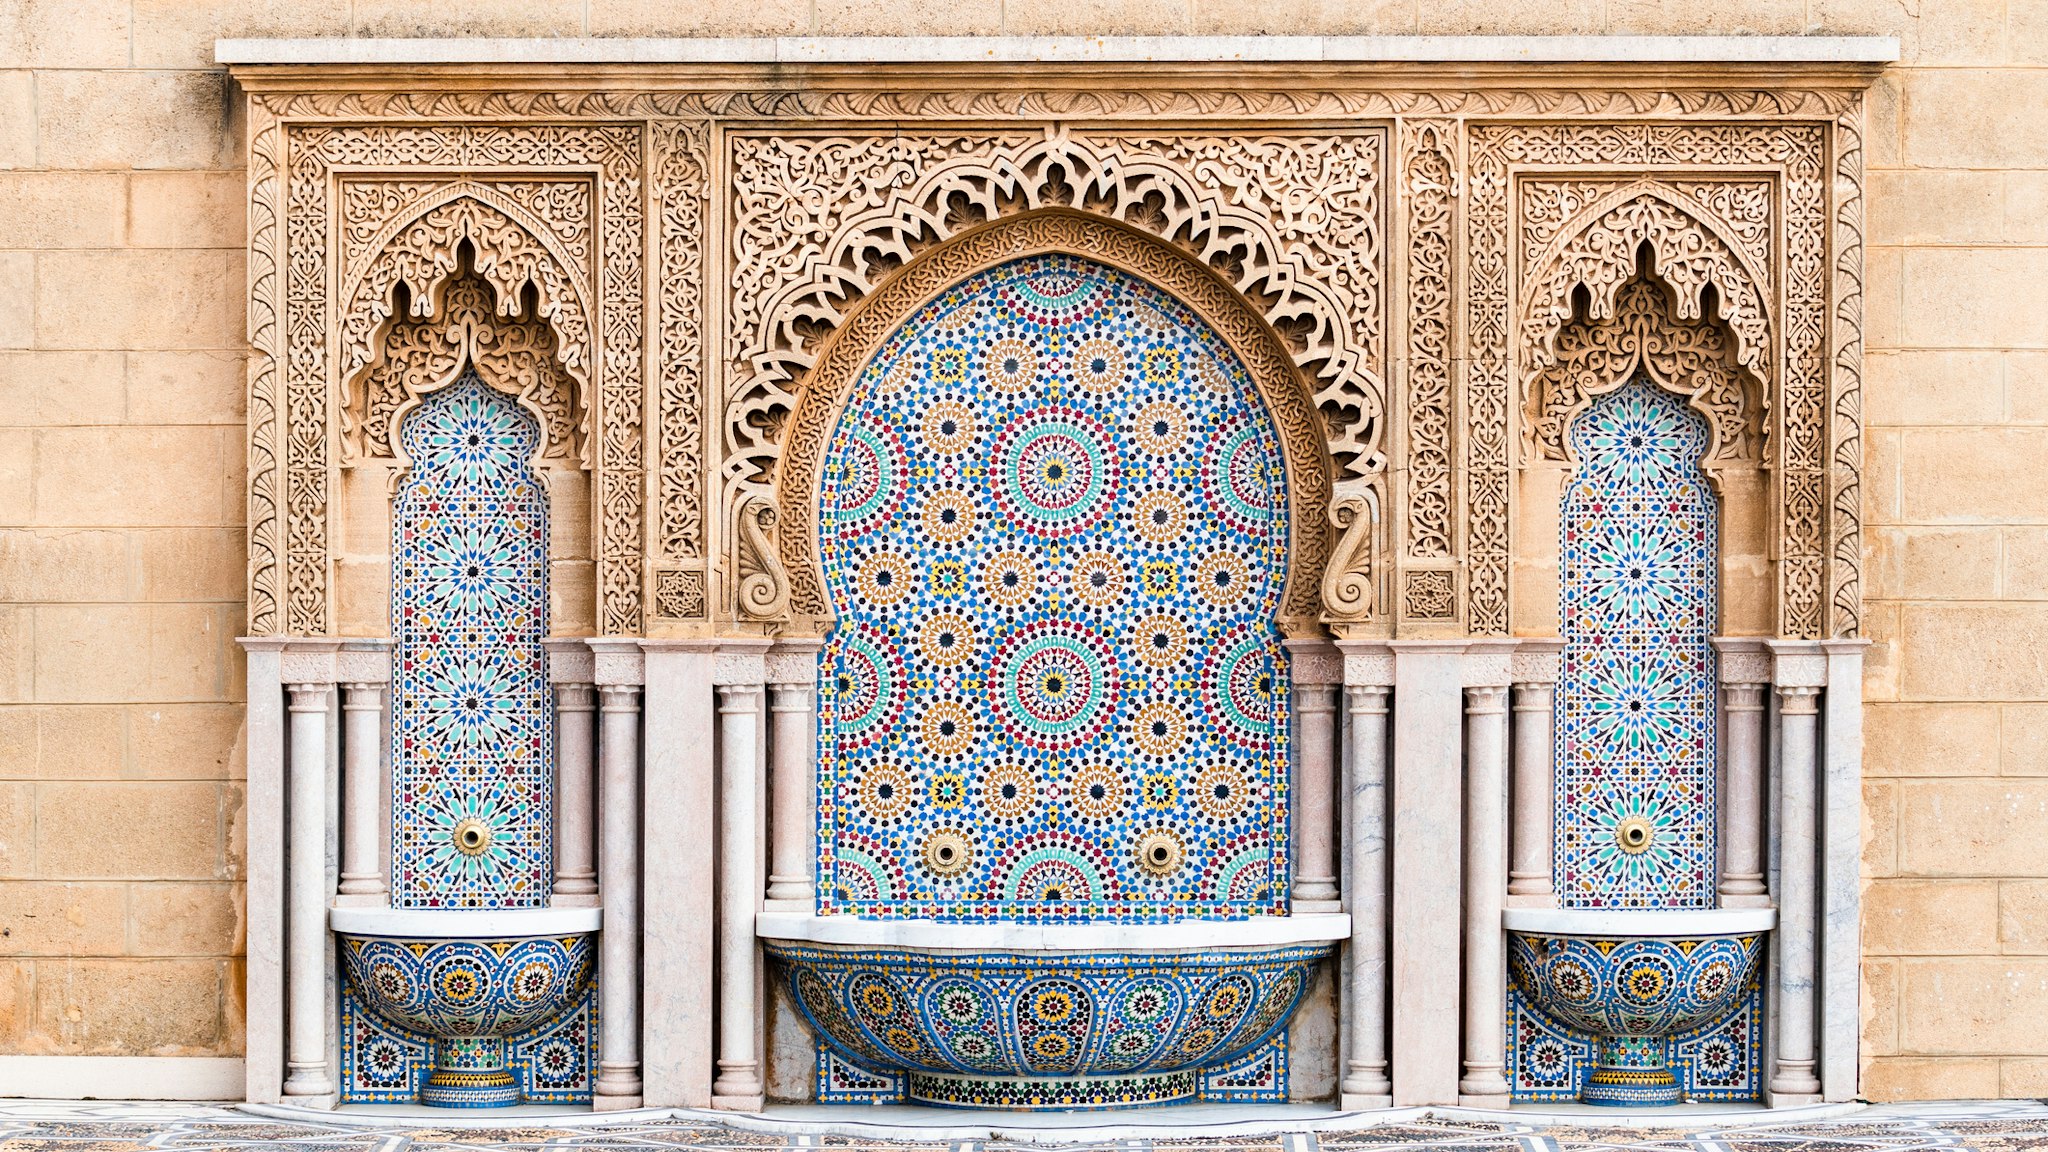 Water fountain with zelige intricate pattern of tiles in classic islamic style on the outside of Mosque Hassan in Rabat, Morocco